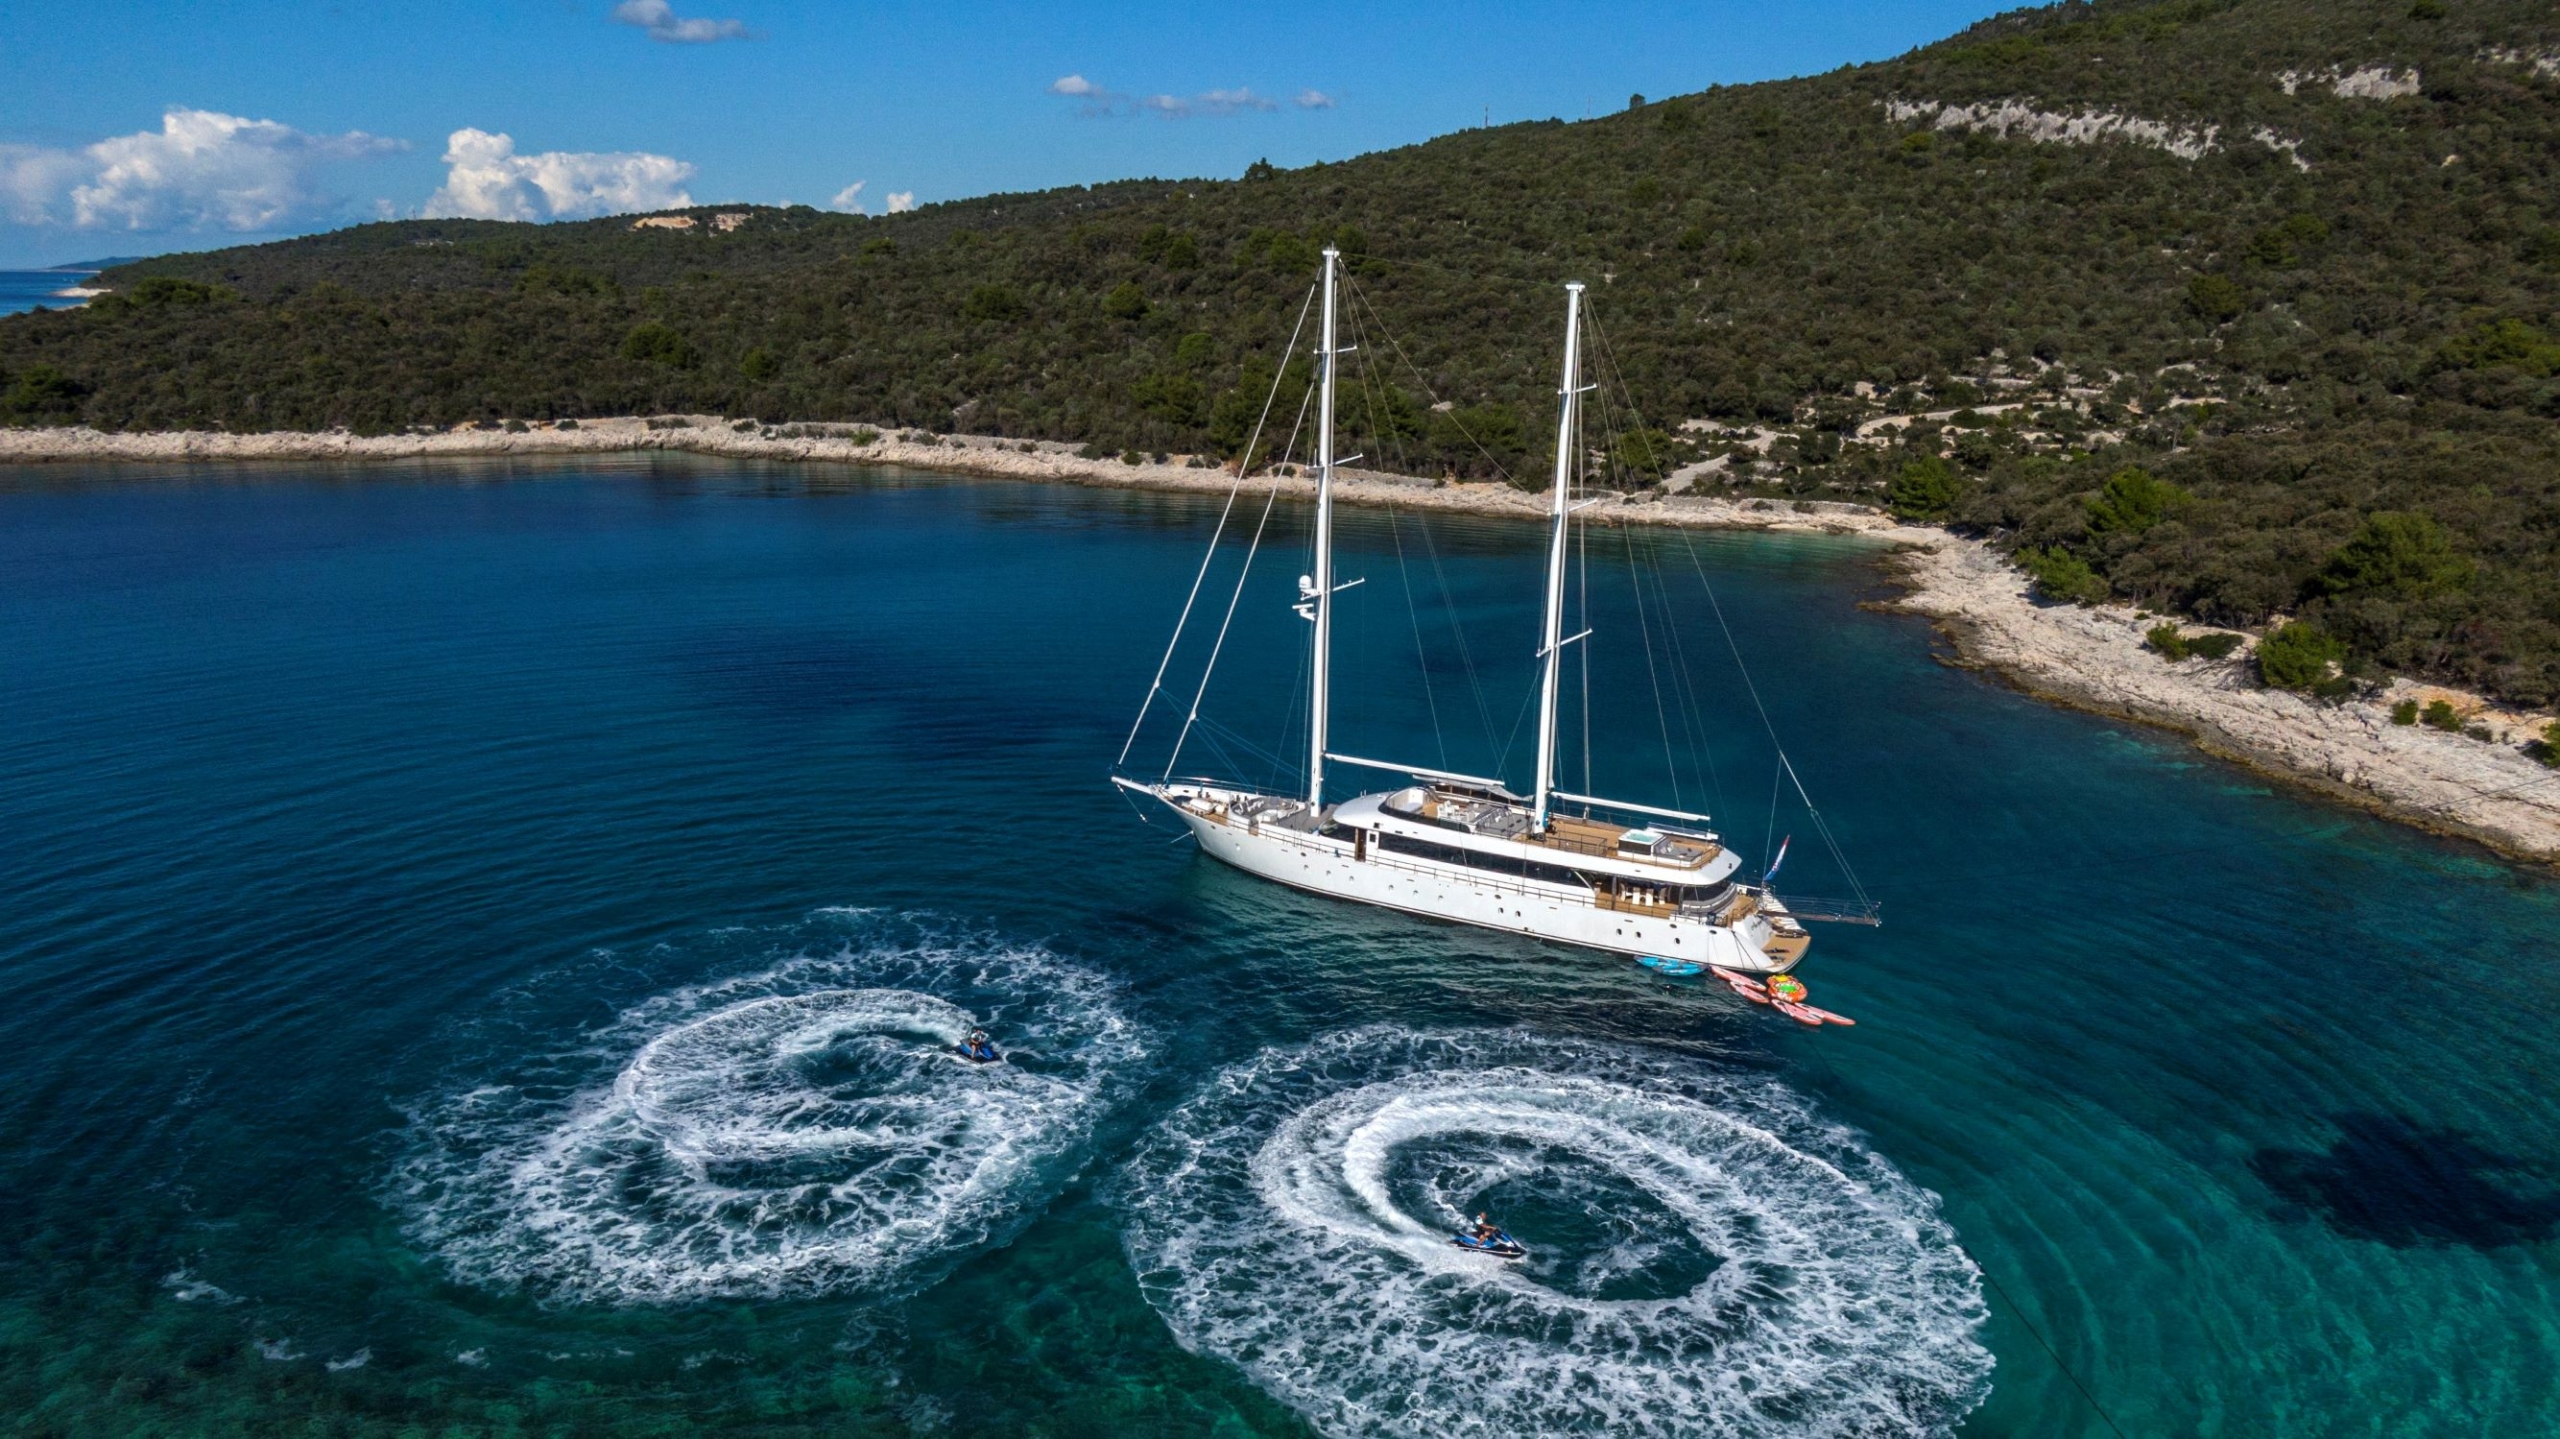 Nestled in the Balkan Peninsula lays Croatia, one of the world's best hidden gems. Known for its stunning views of the Adriatic coastline, gorgeous beaches, and breathtaking waterfalls, can you think of a better place to luxuriate on a yacht?